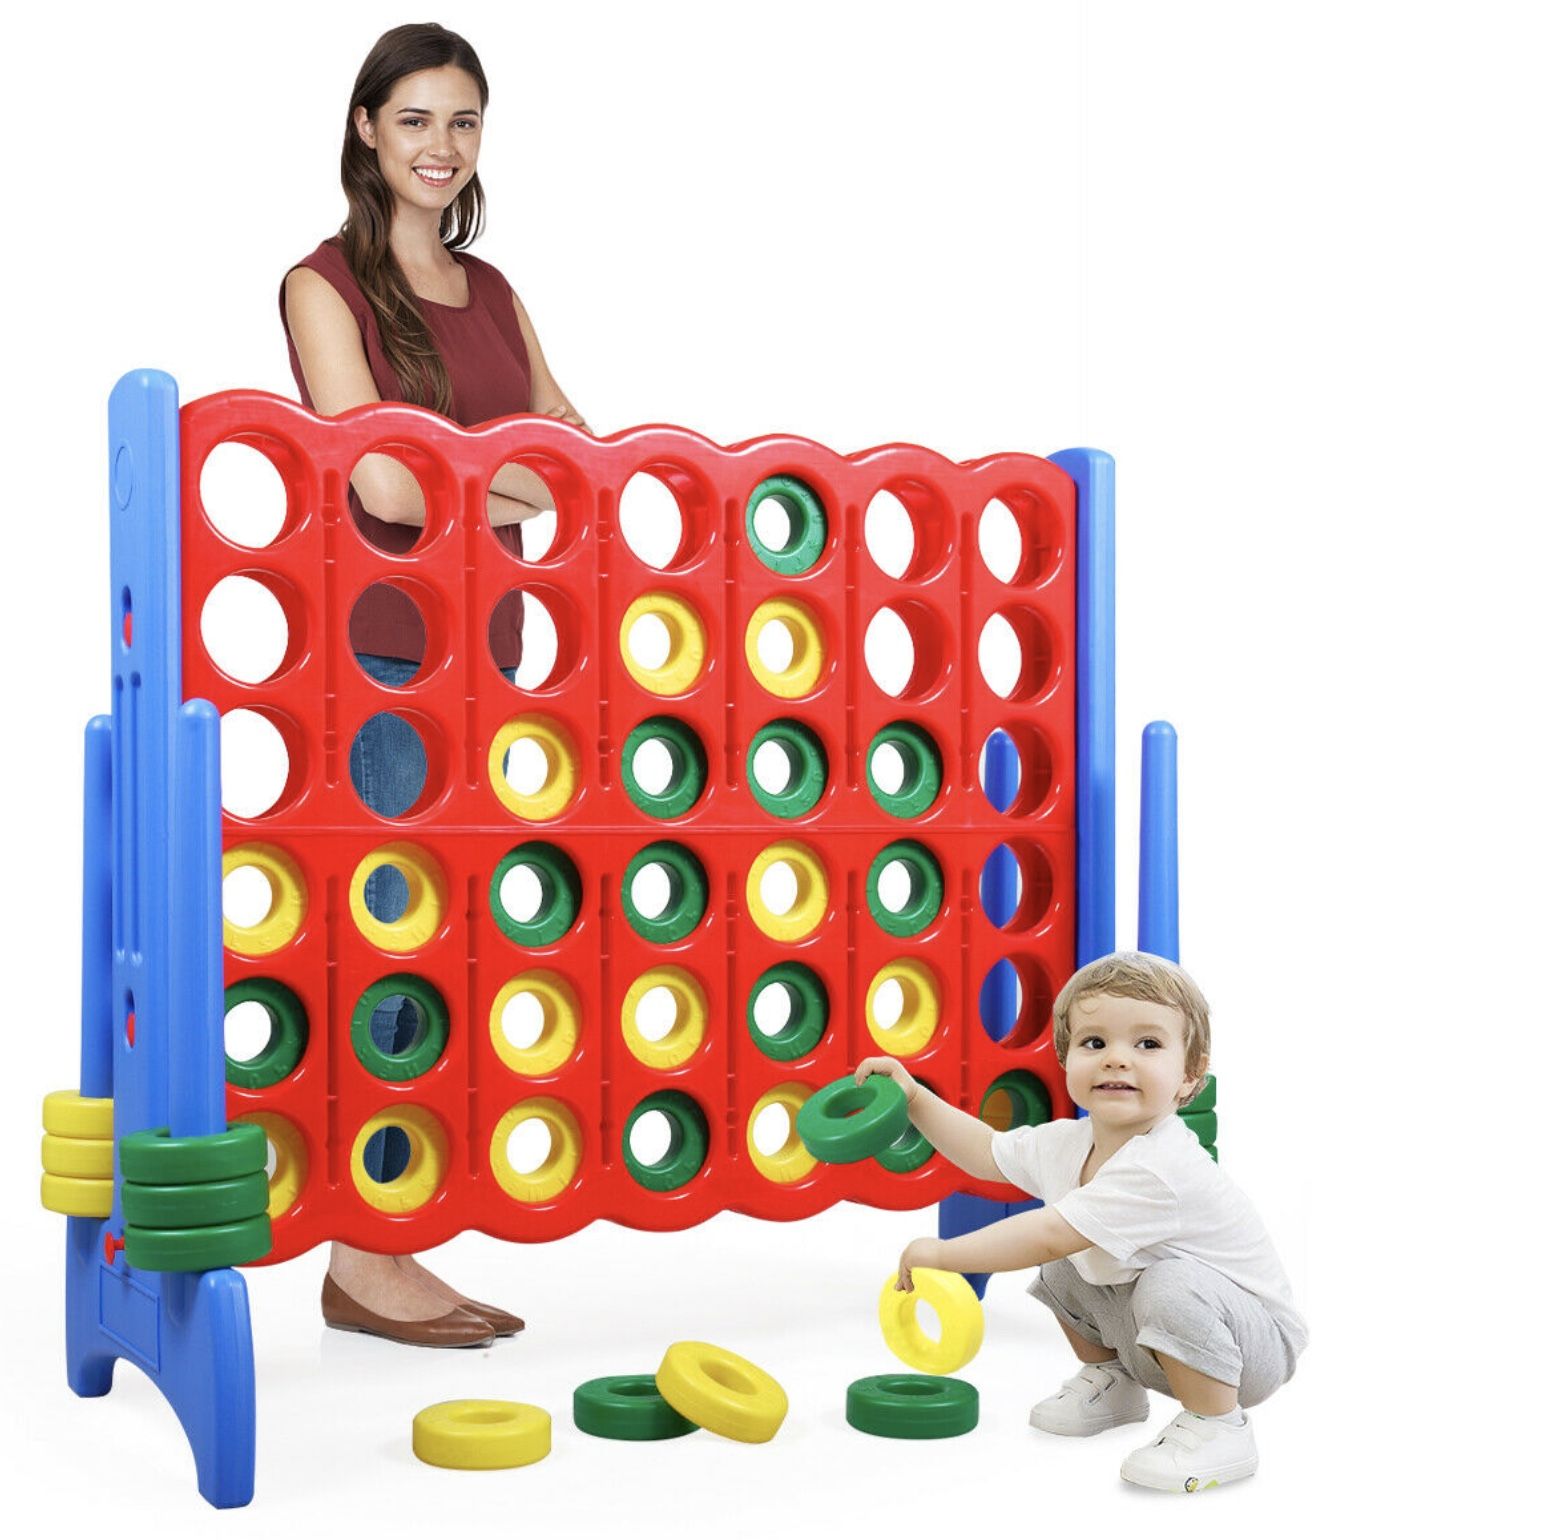 Jumbo 4-to-Score in A Row Giant Game Set Outdoor Games Kids Adults Family Fun